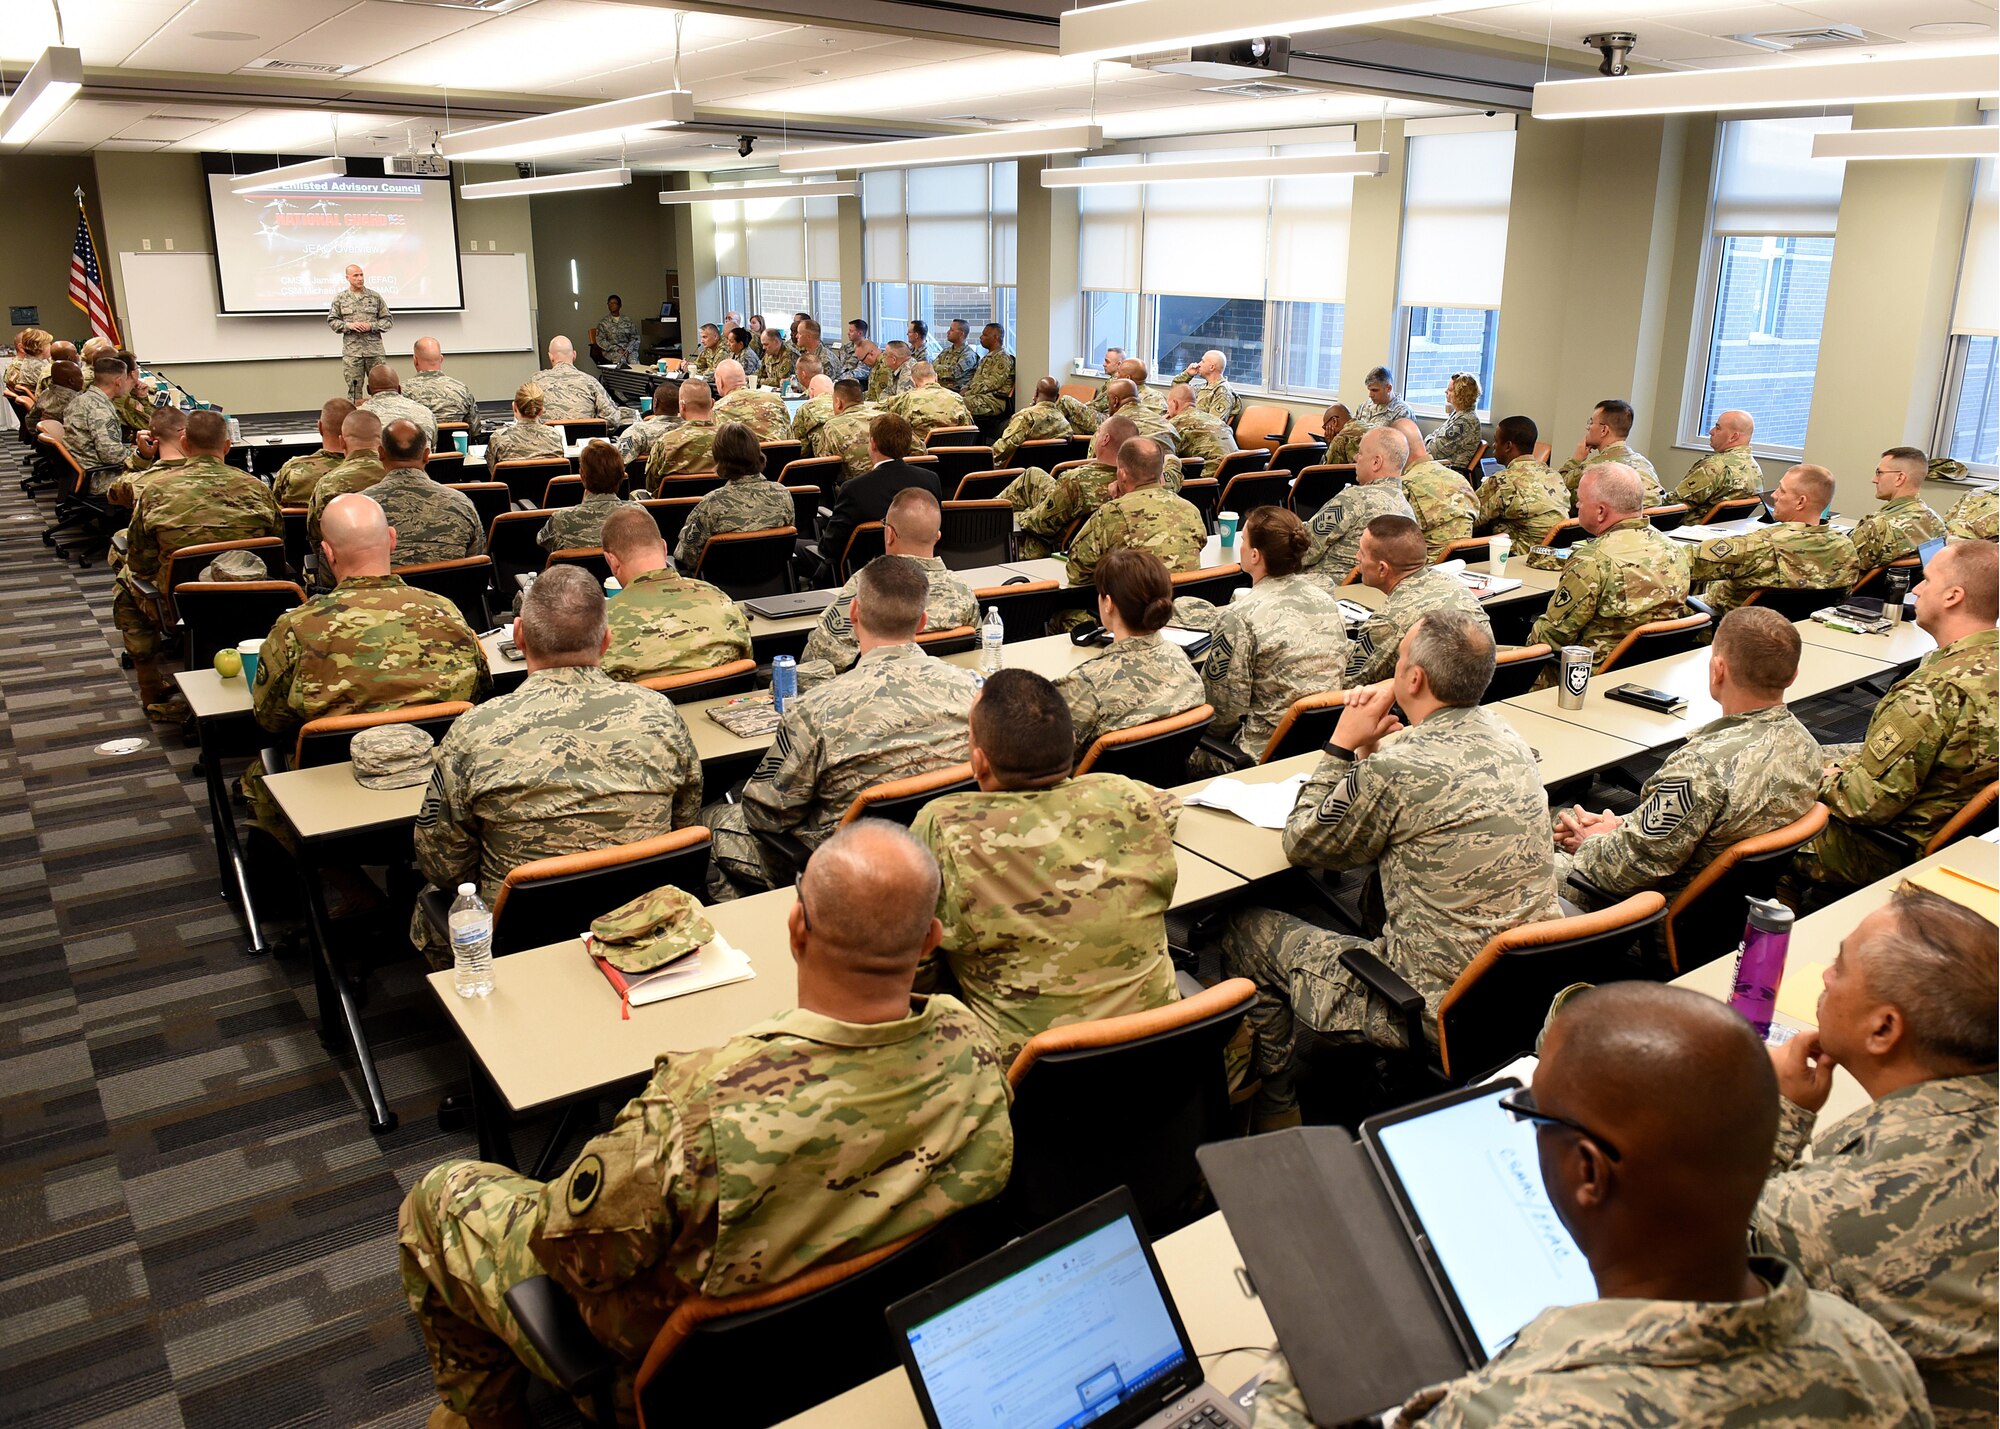 Chief Master Sgt. Edward Walden Sr., the commandant of the Chief Master Sergeant Paul H. Lankford Enlisted Professional Military Education Center, speaks with the Army and Air National Guard’s top enlisted leaders at the I.G. Brown Training and Education Center campus, May 2, 2017, in east Tennessee. The National Guard Joint Enlisted Advisory Council (JEAC) met at TEC this week to work together, as well as within their component groups, and coordinate efforts addressing enlisted Guard members. (U.S. Air National Guard photo by Master Sgt. Mike R. Smith)